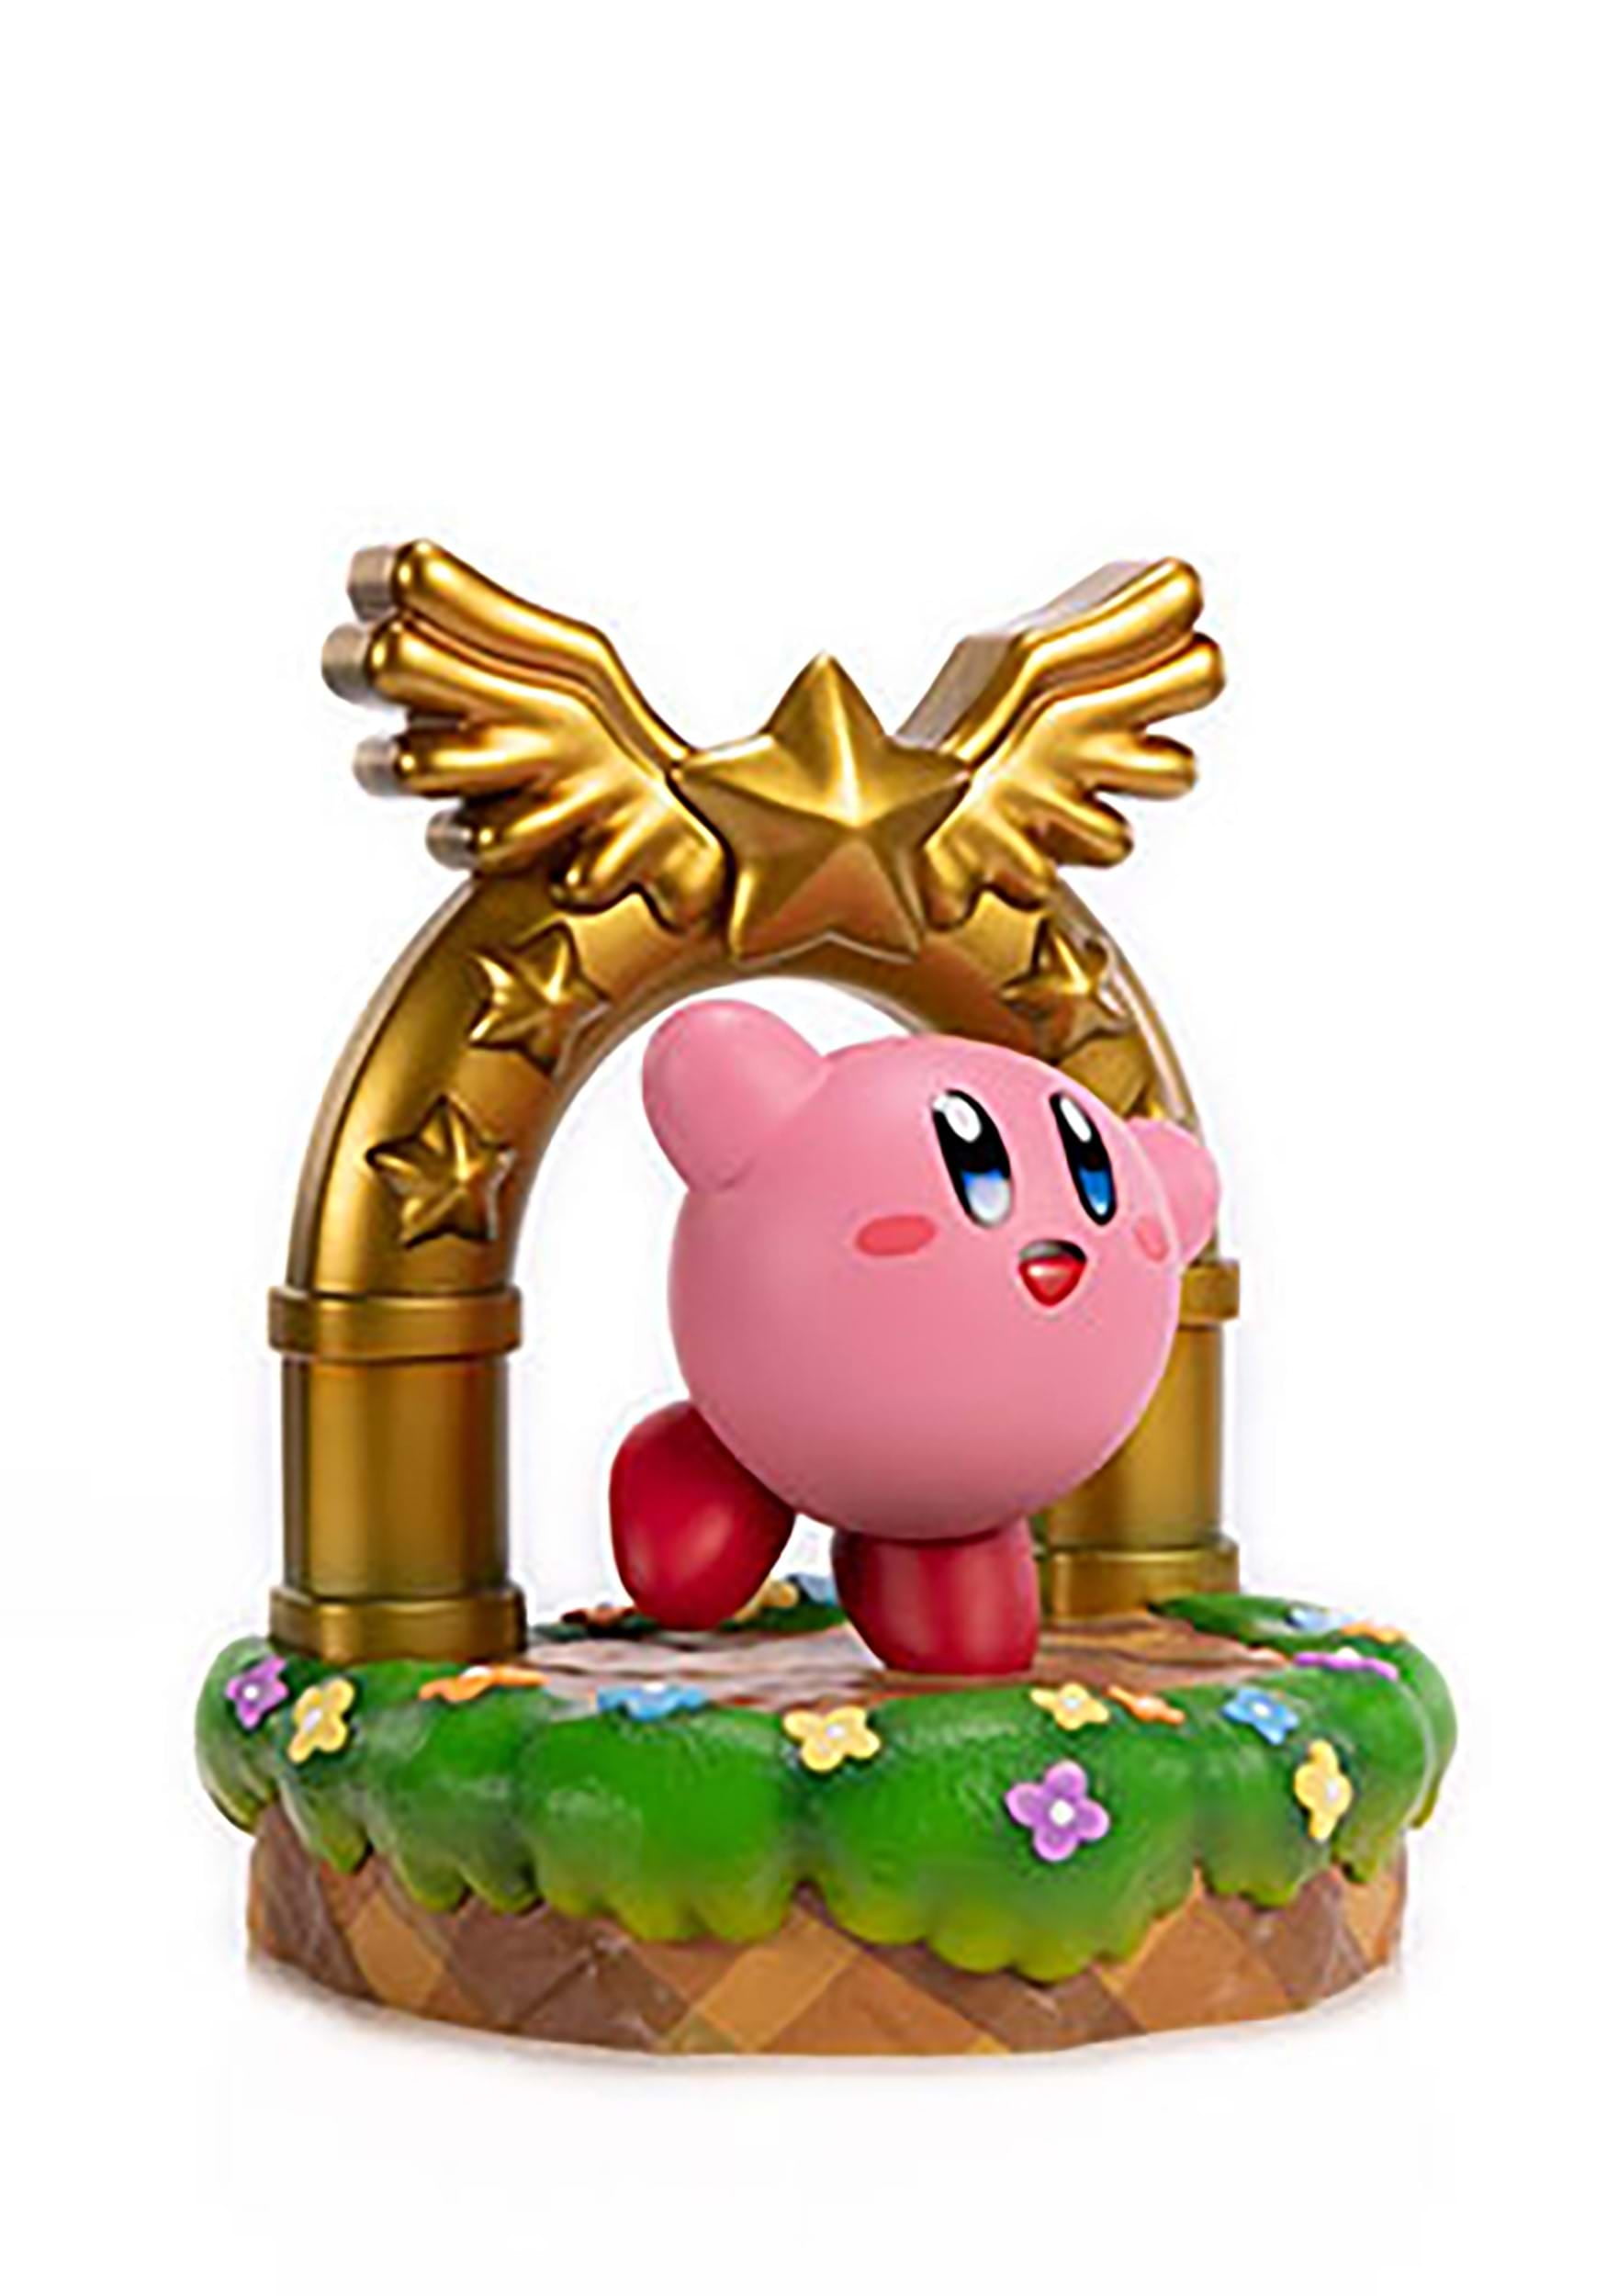 Kirby and the Goal Door PVC Statue | Standard Edition